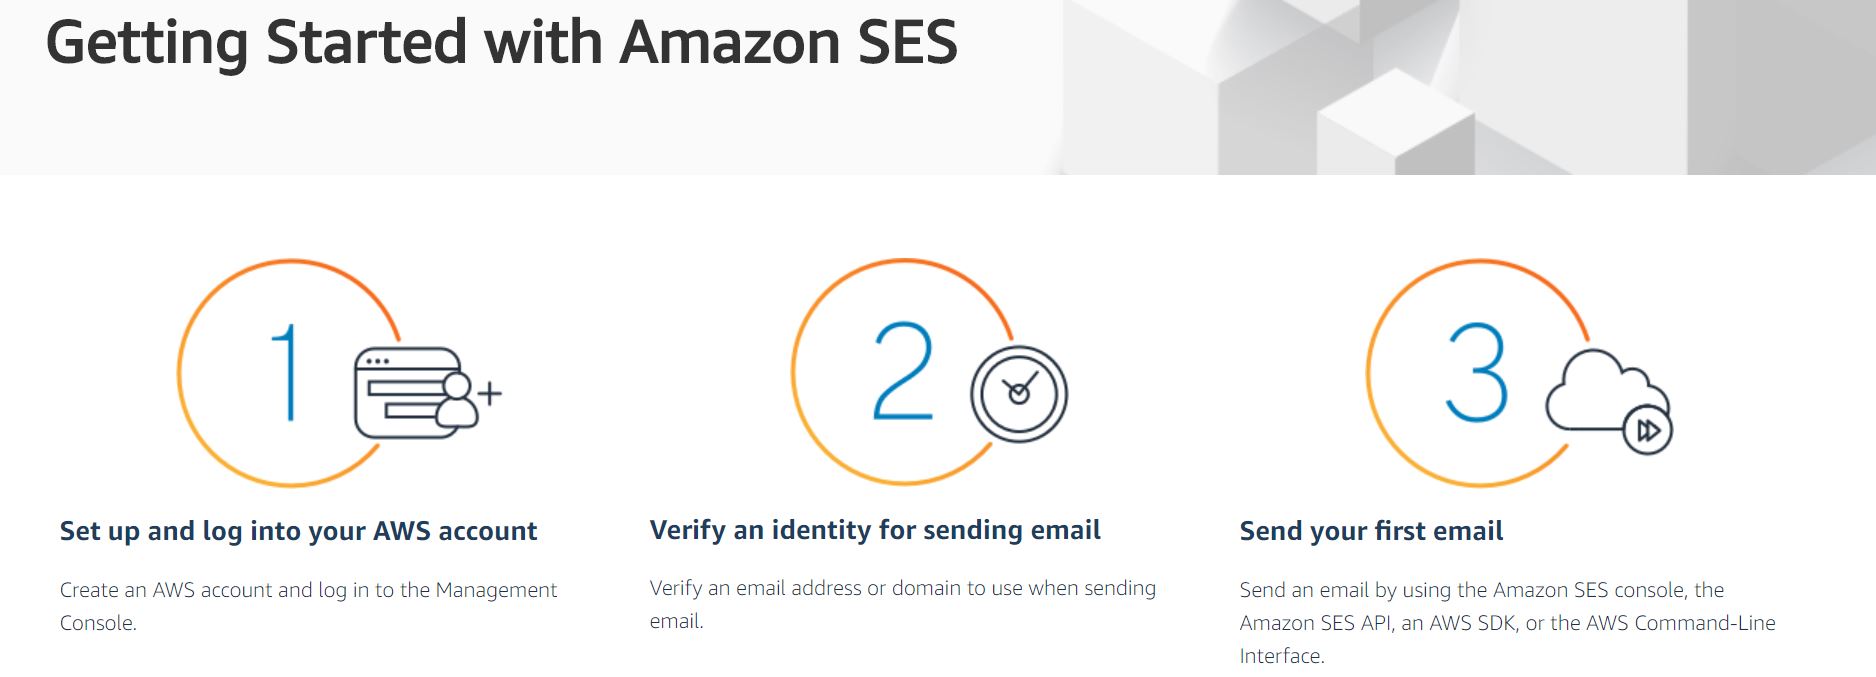 Amazon simple email service